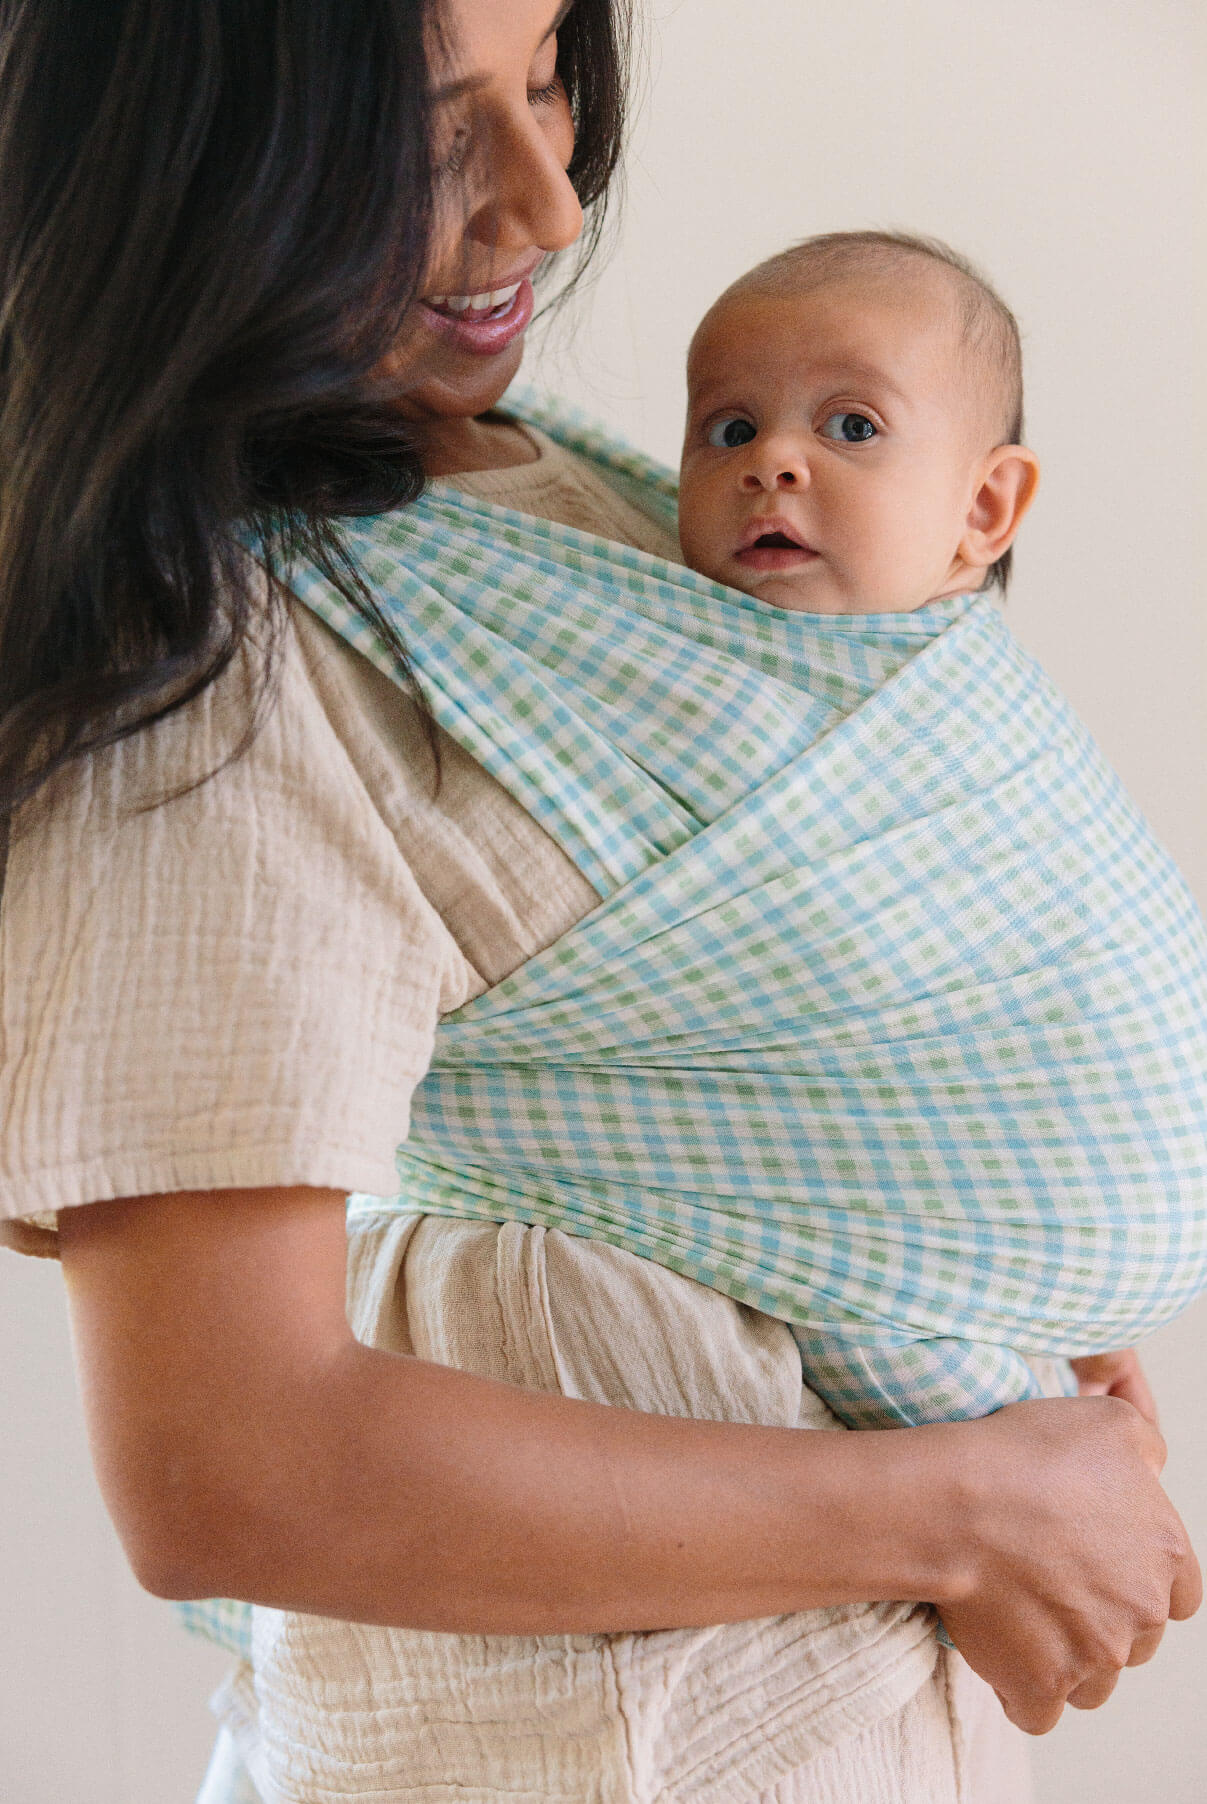 Brunette mother looks down at her baby wrapped in a green and blue gingham Solly wrap